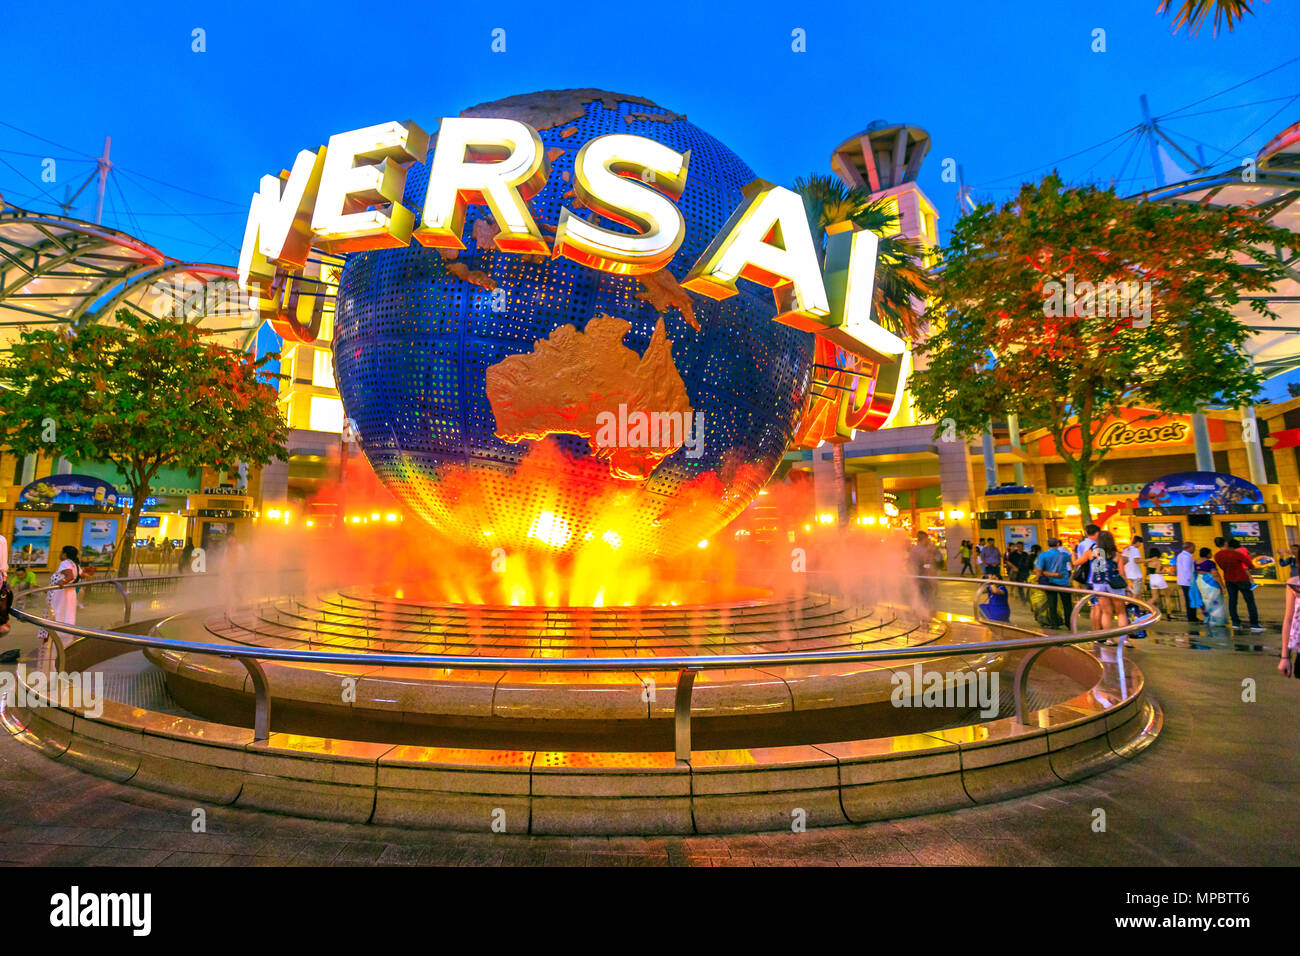 Singapore - May 2, 2018: Sentosa Universal Studios globe at night with orange lights. Universal Studios Singapore is Southeast Asia's first Hollywood movie theme park. Popular tourist attraction. Stock Photo